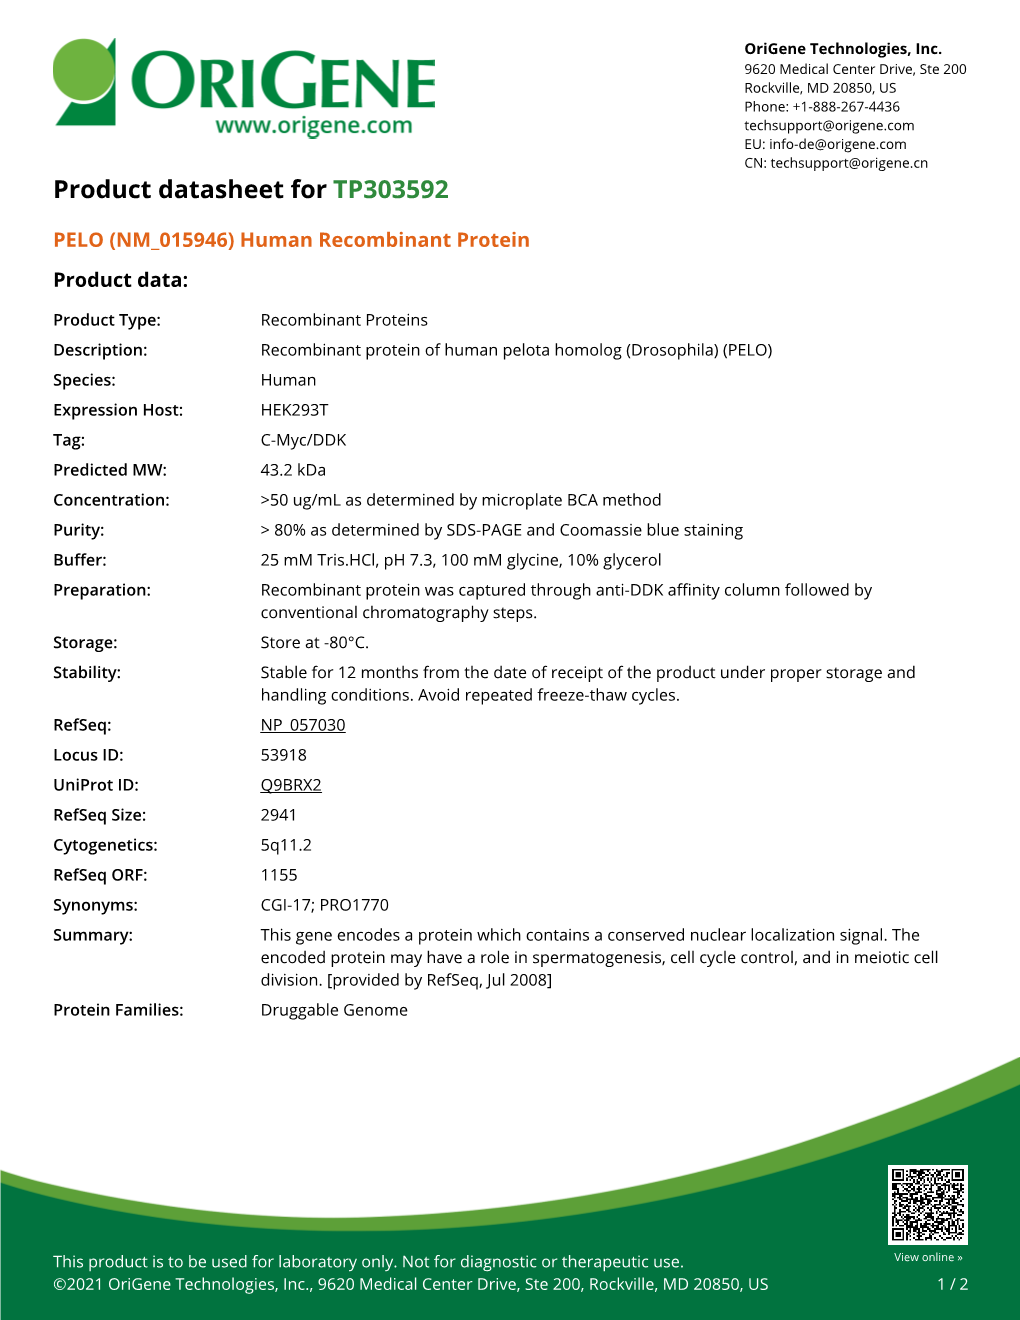 PELO (NM 015946) Human Recombinant Protein – TP303592